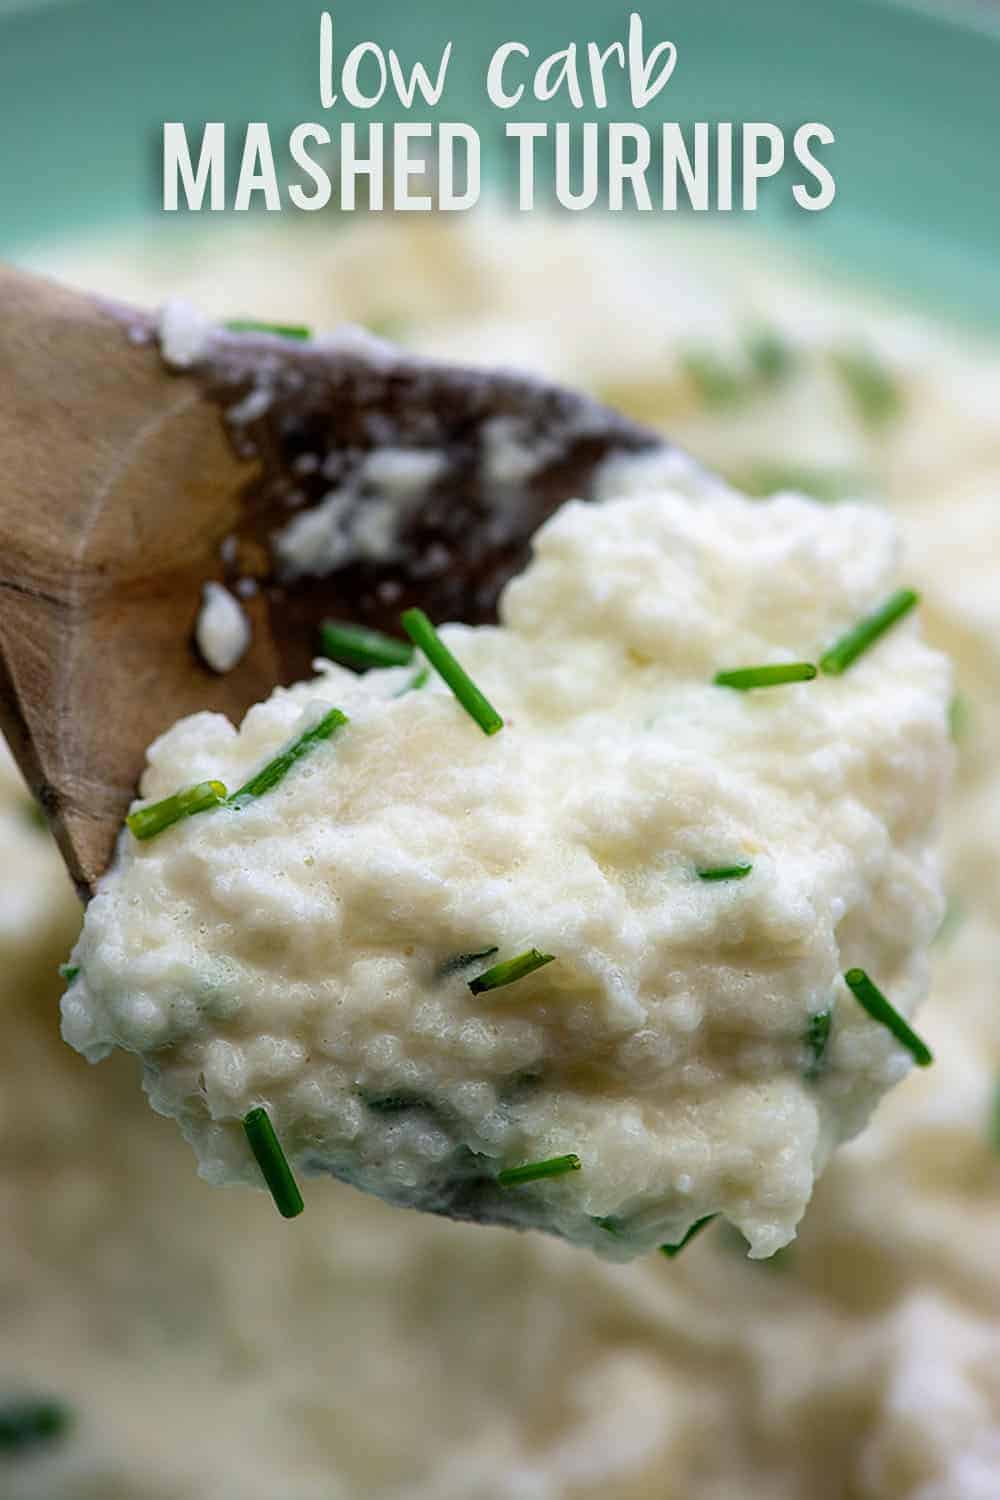 Wooden spoon of low carb mashed turnips